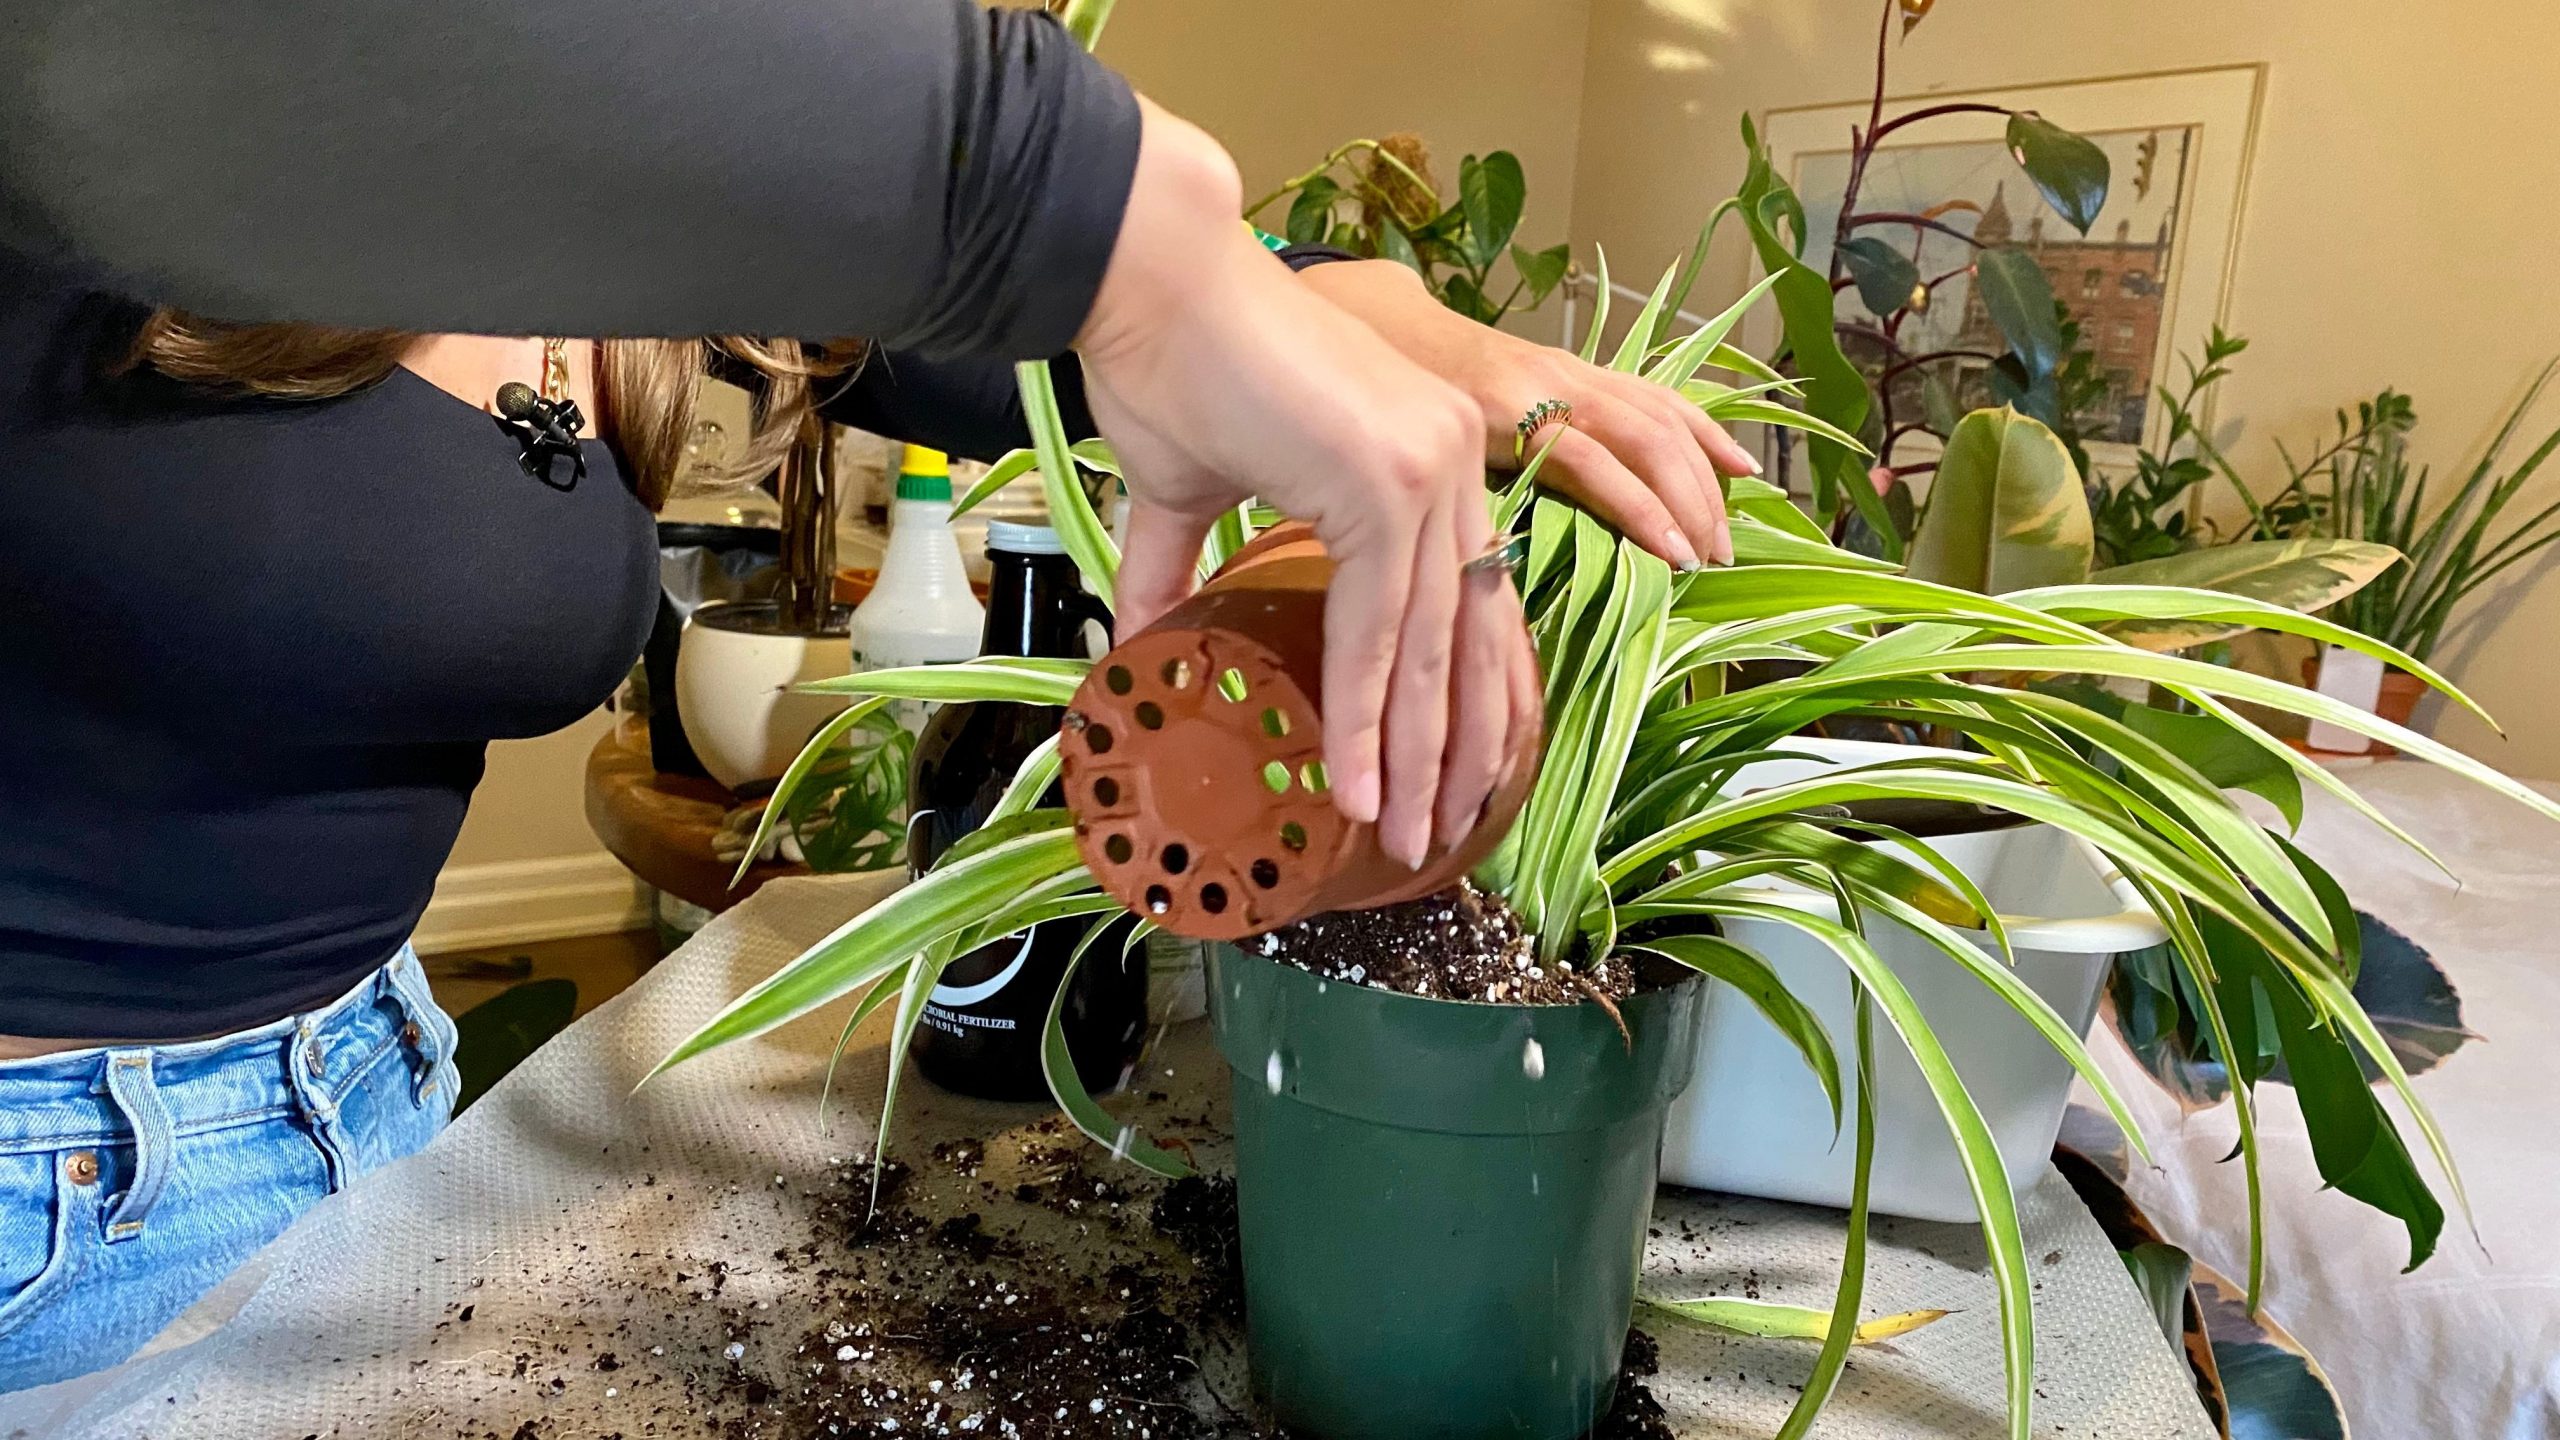 Fill the pot with soil